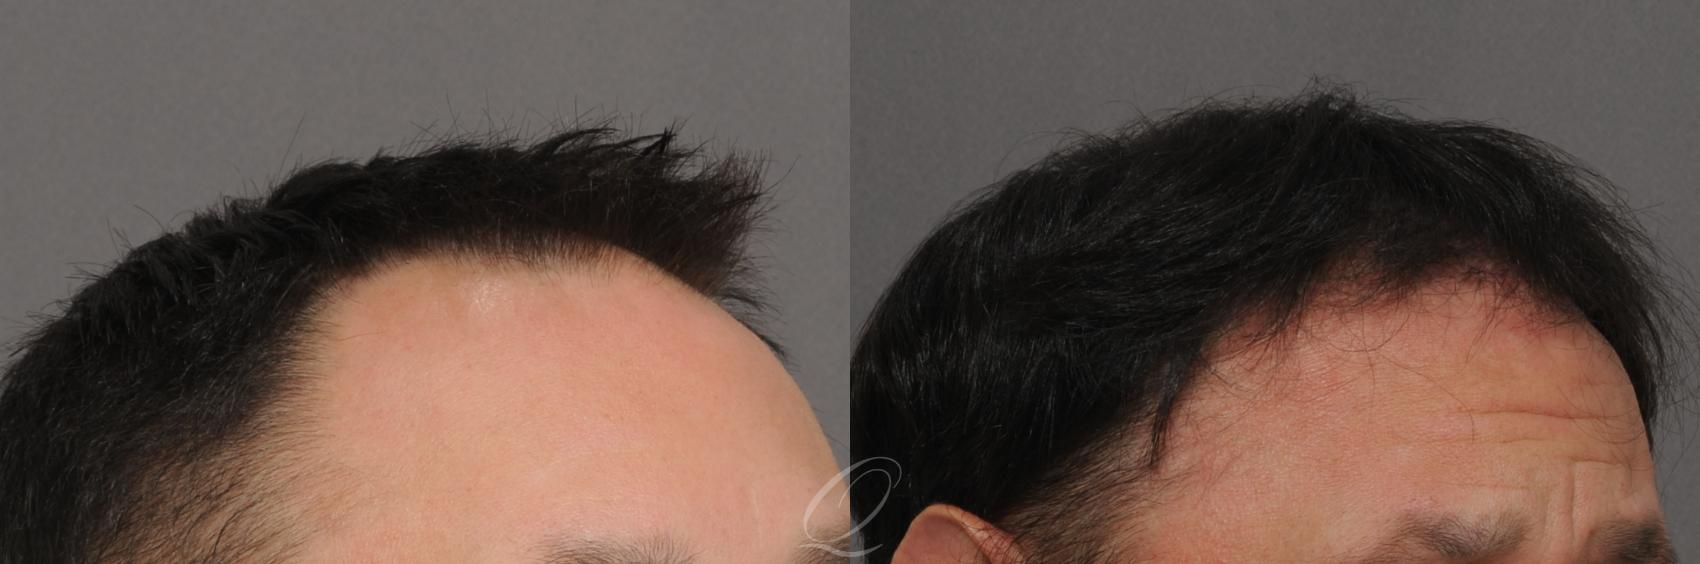 FUT Before & After Photos Patient 1017 | Rochester, Buffalo, & Syracuse, NY  | Quatela Center for Hair Restoration